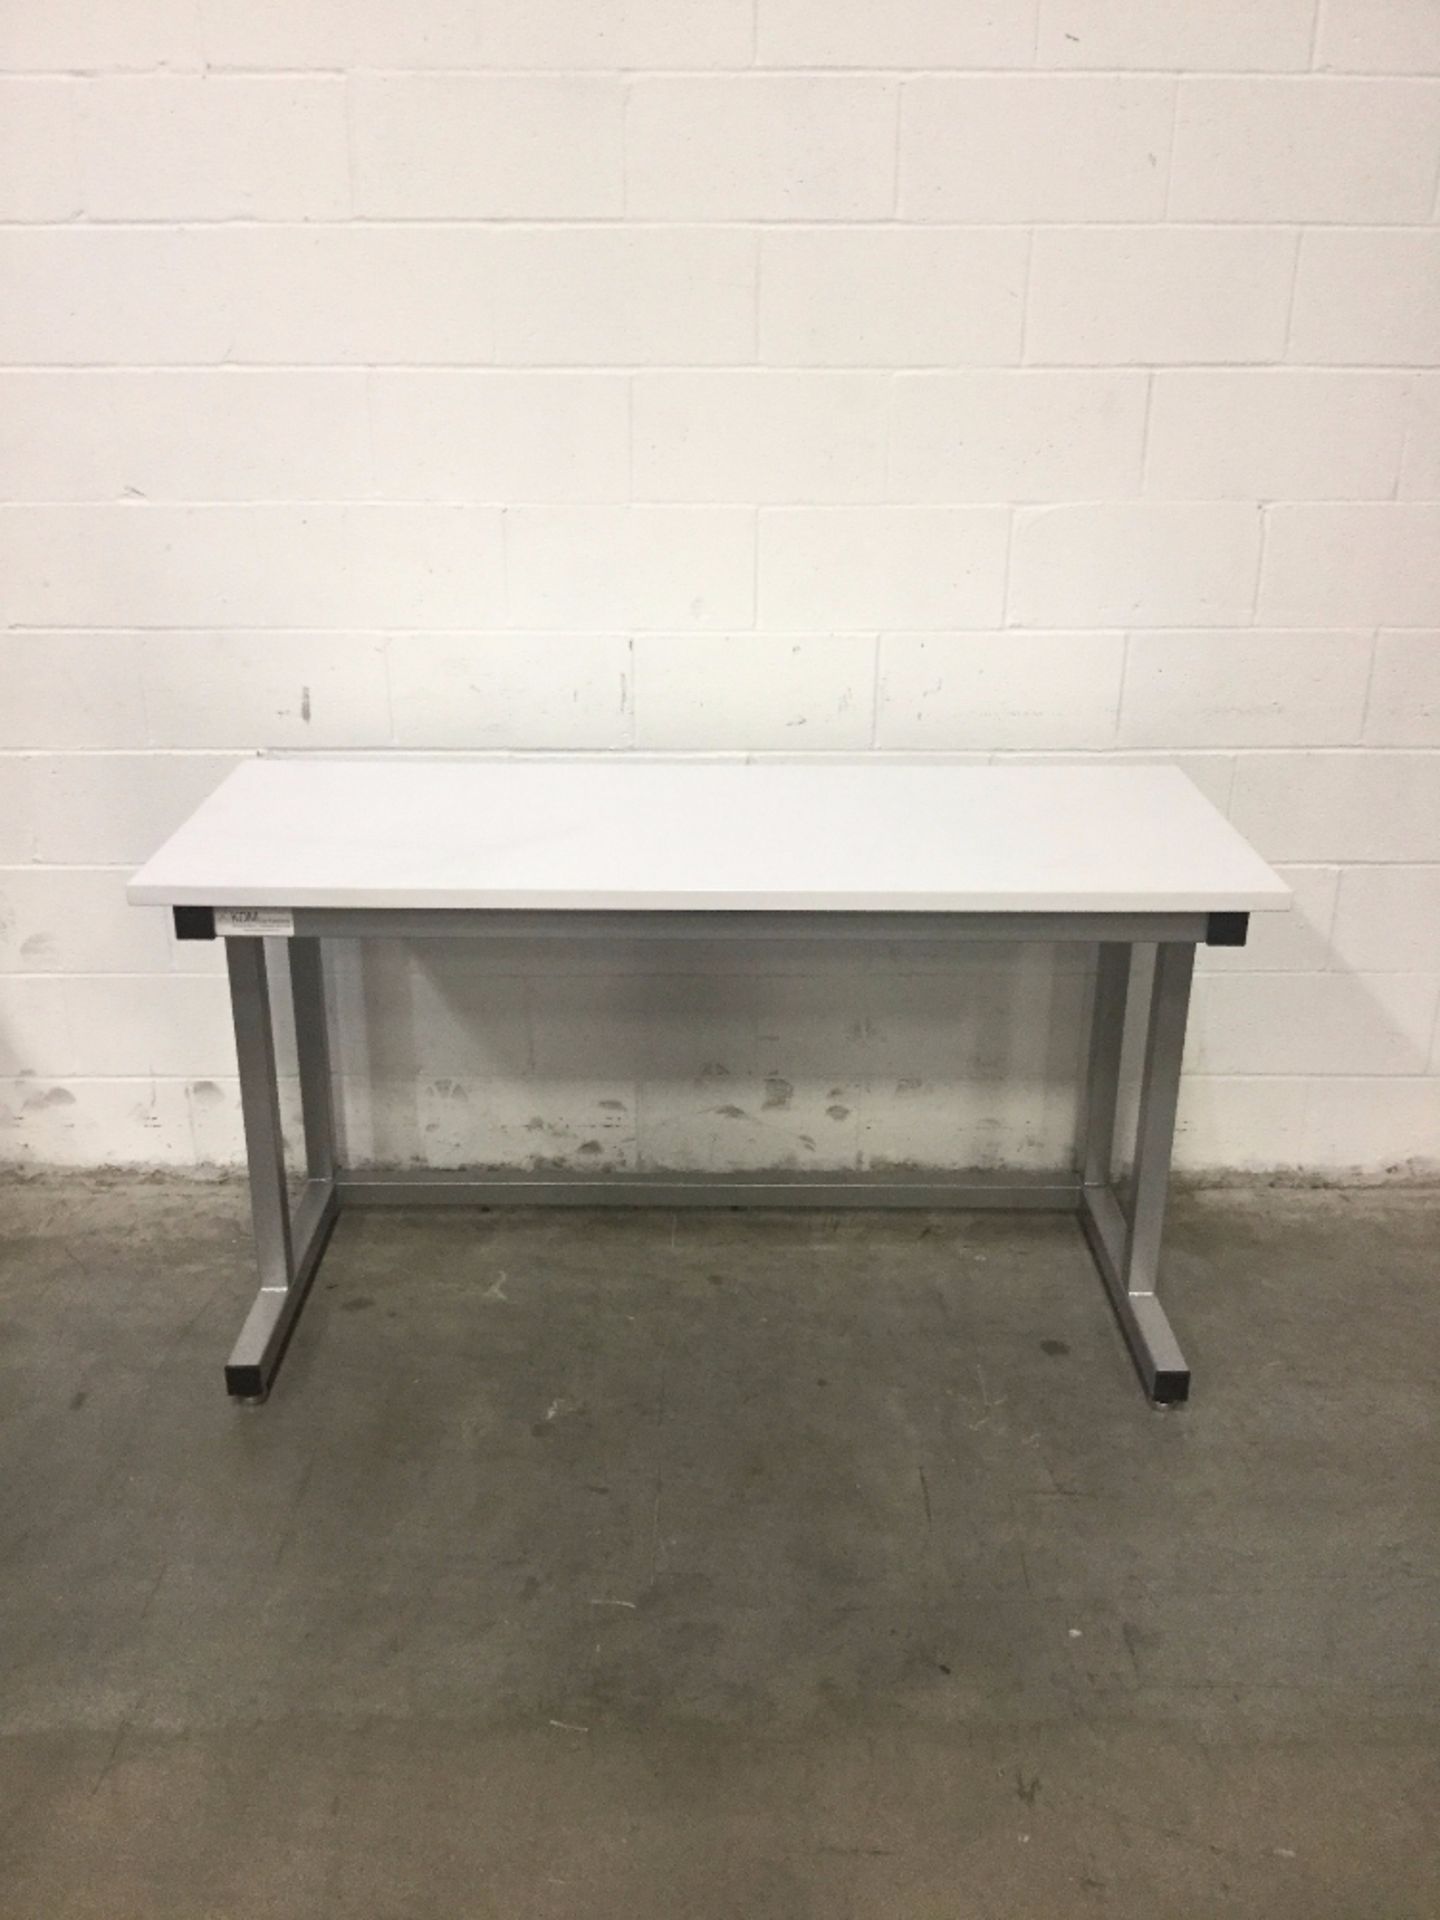 KDM Labs 5' Stationary Lab Table